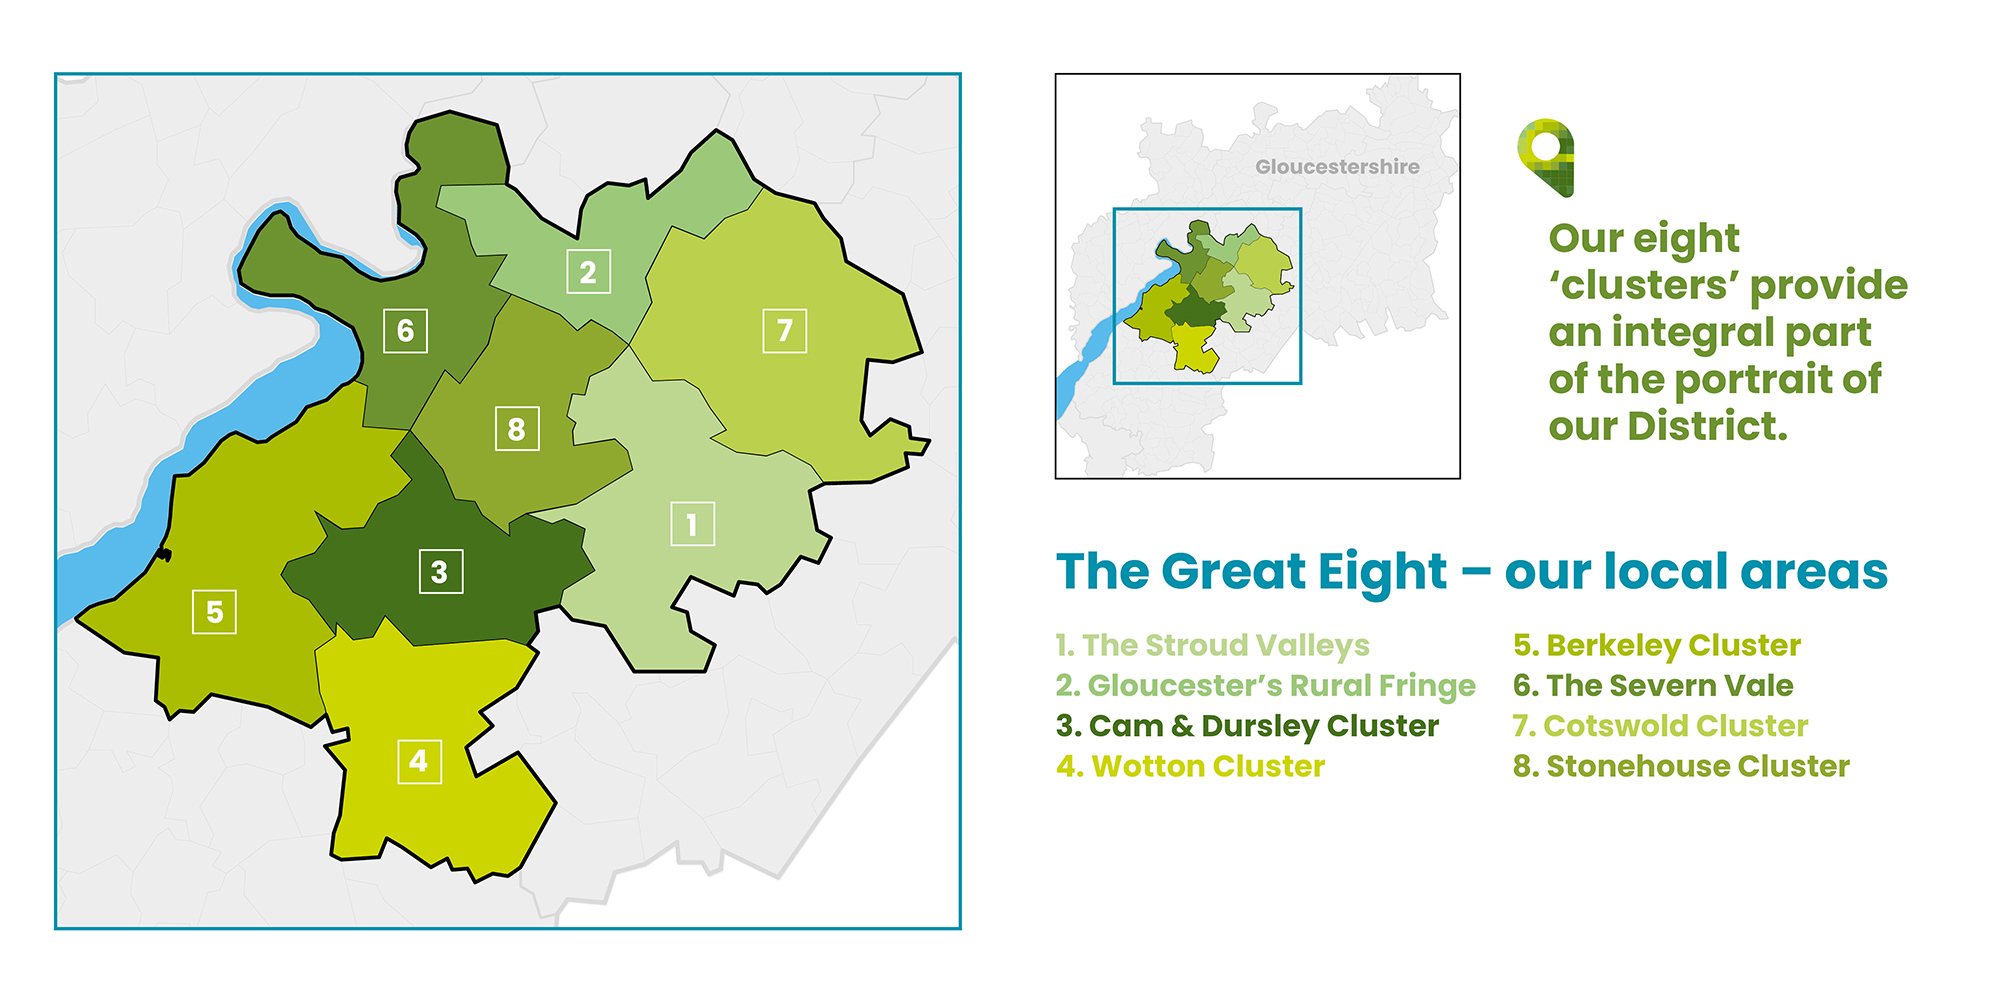 Our eight 'clusters' provide an integral part of the portrait at our District. the Great Eights - our local areas. 1. The Stroud Valleys, 2. Gloucester's Rural Fringe, 3. Cam & Dursley Cluster, 4. Wotton Cluster, 5. Berkeley Cluster, 6. The Severn Vale, 7. Cotswold Cluster, 8. Stonehouse Cluster